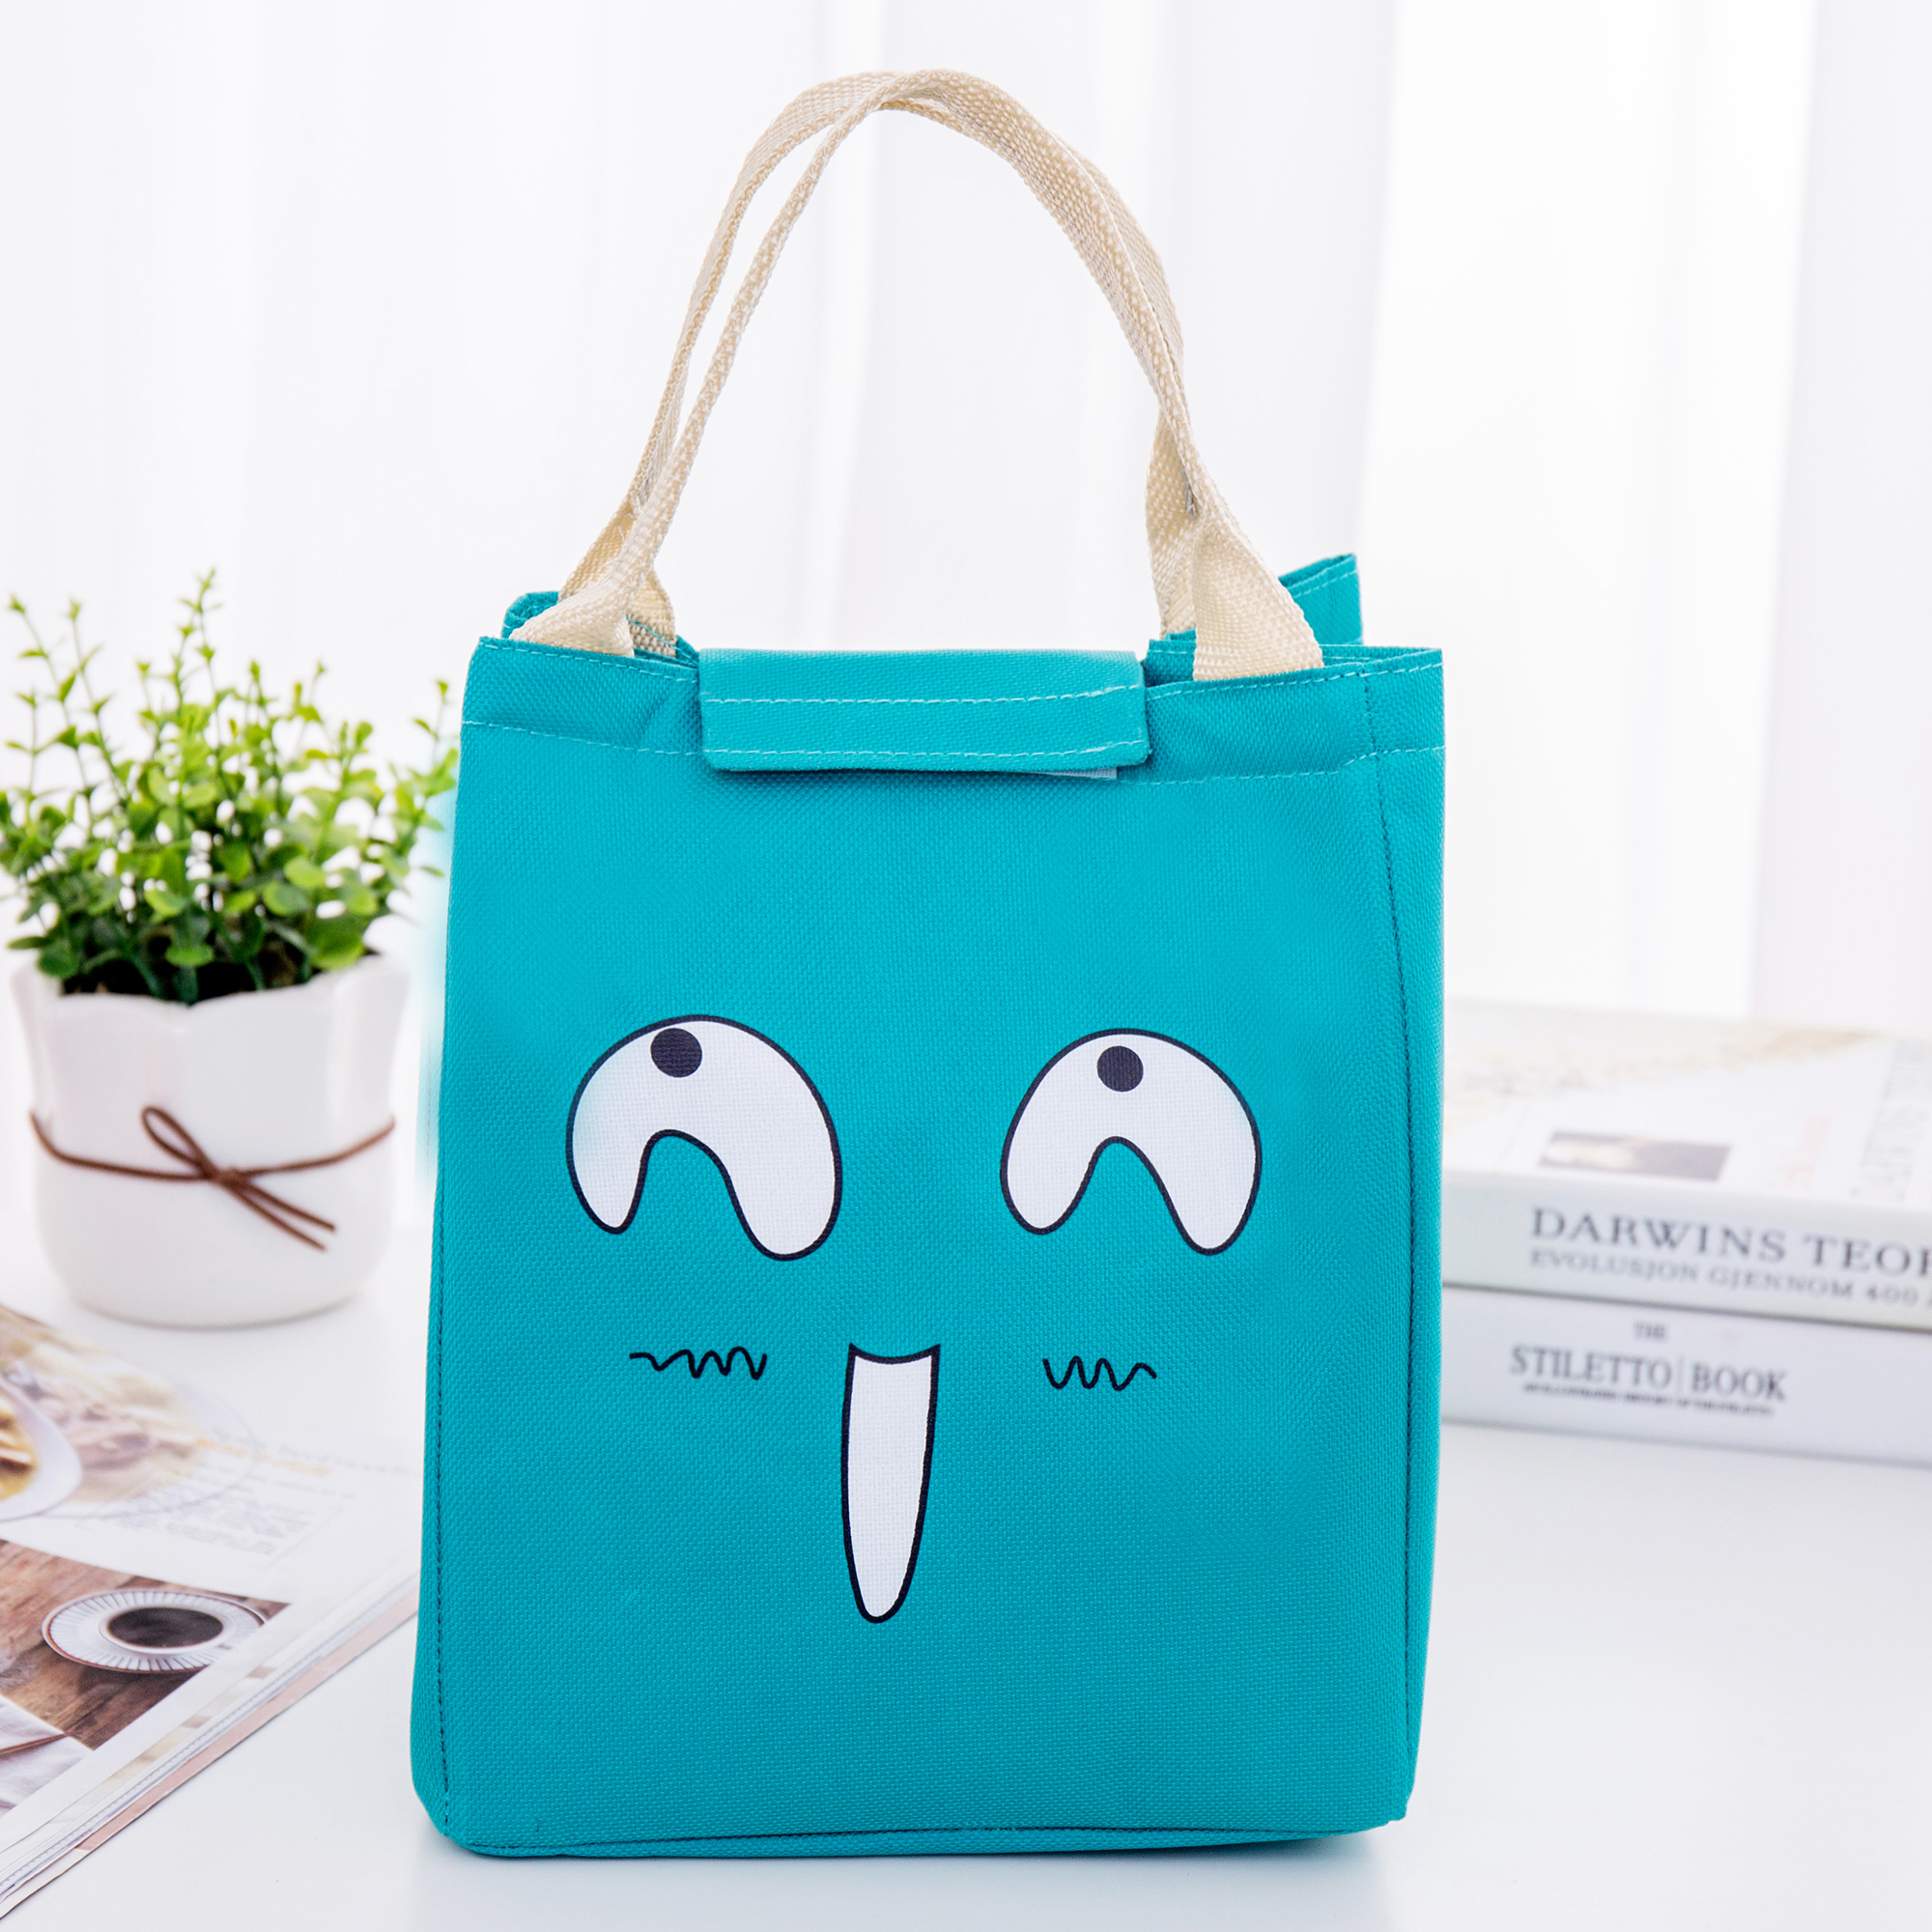 Lunch-Tote-Bag-Portable-Picnic-Cooler-Insulated-Handbag-Food-Storage-Container-1263595-5